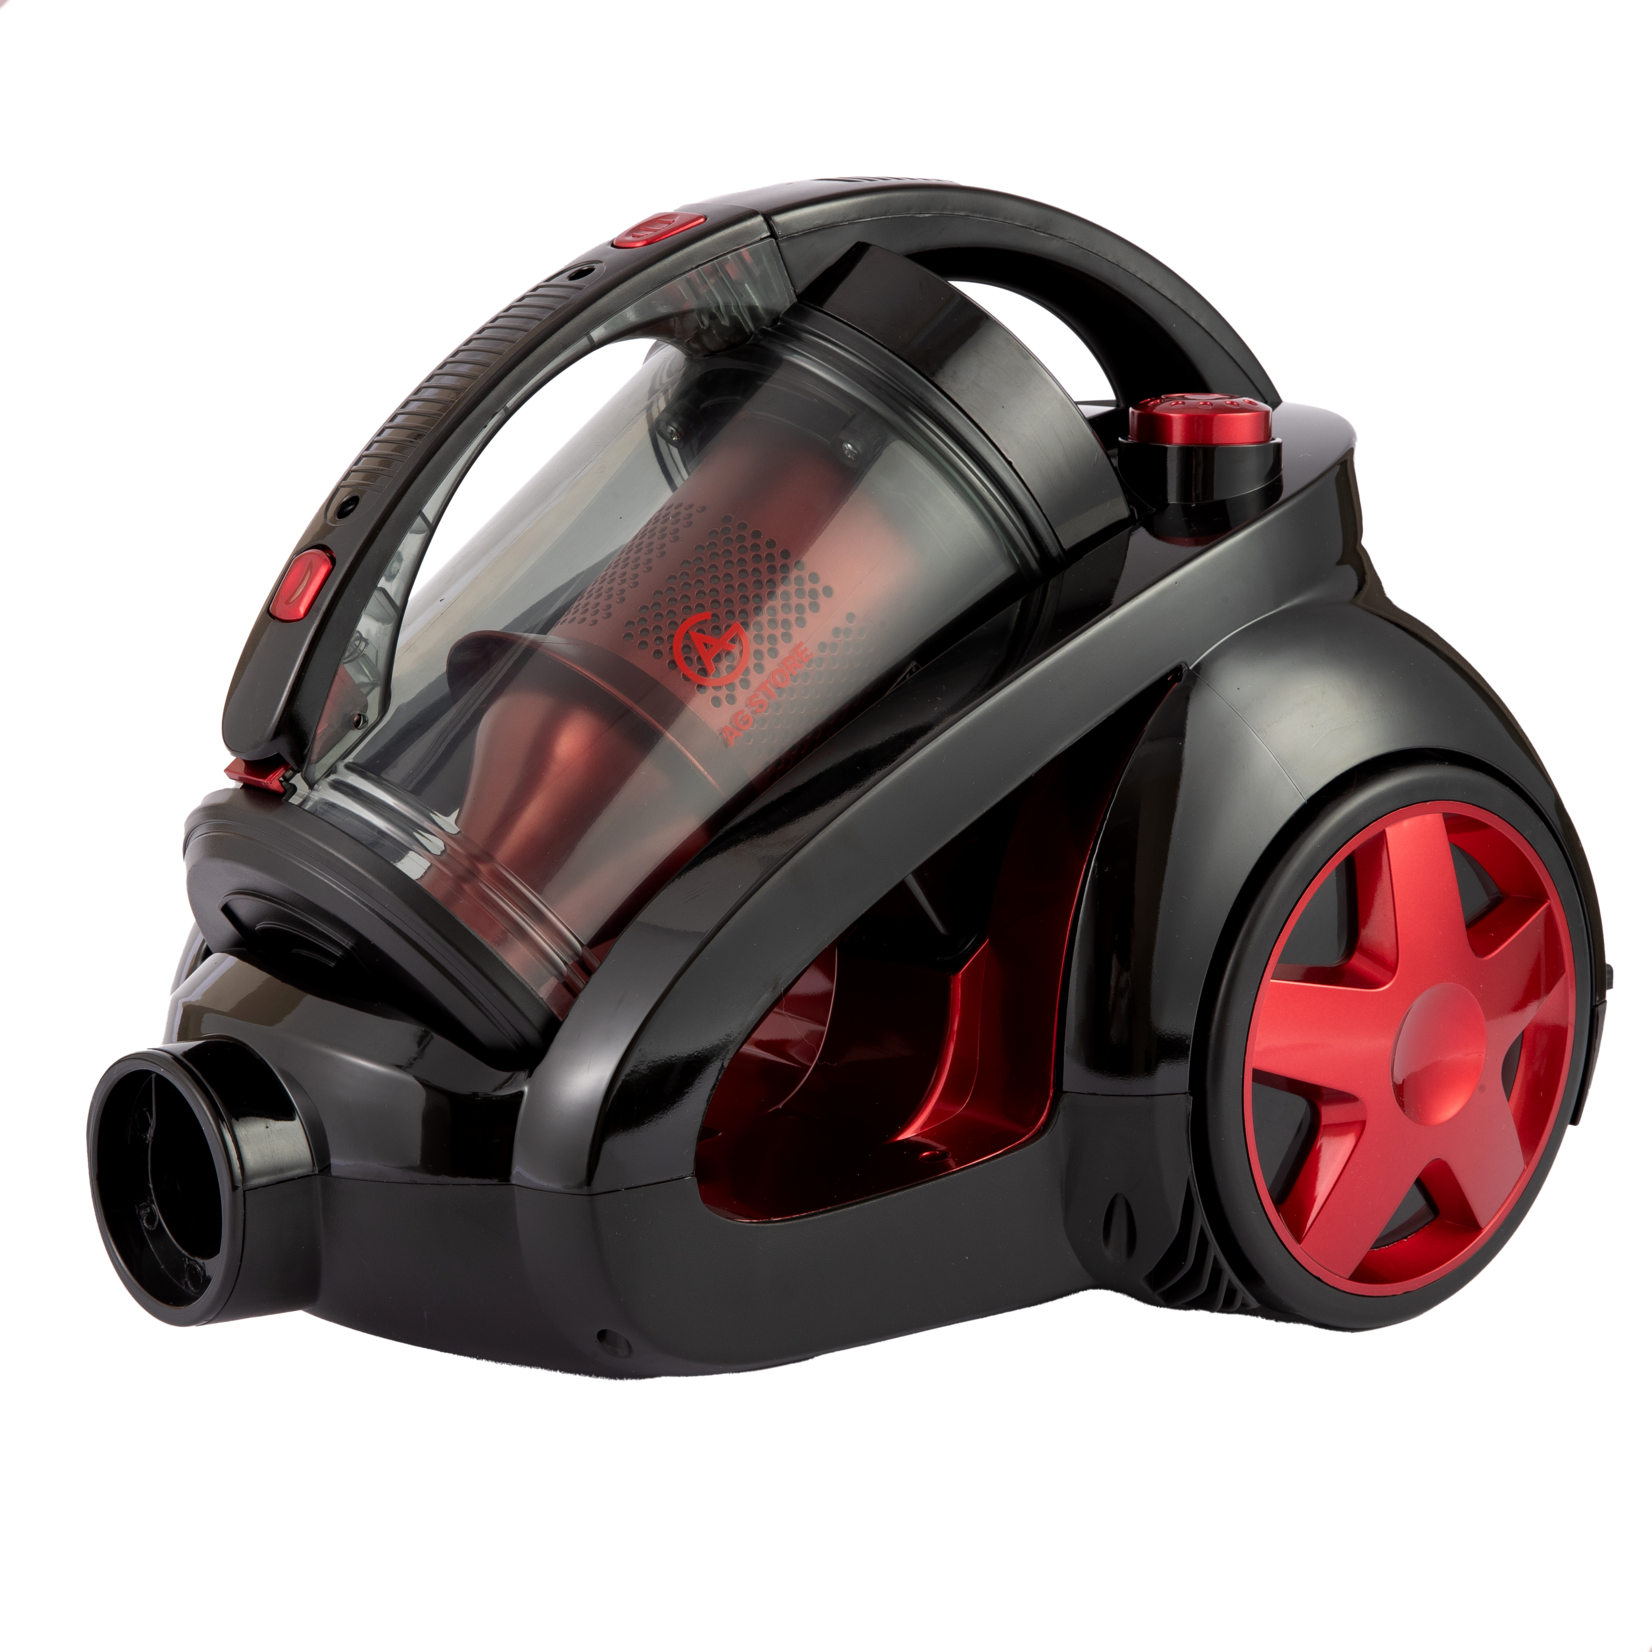 AG AG3000 - Bagless vacuum cleaner - 900 Watt - Strong suction power - Vacuum cleaners - Compact and light - Quiet - easy to use